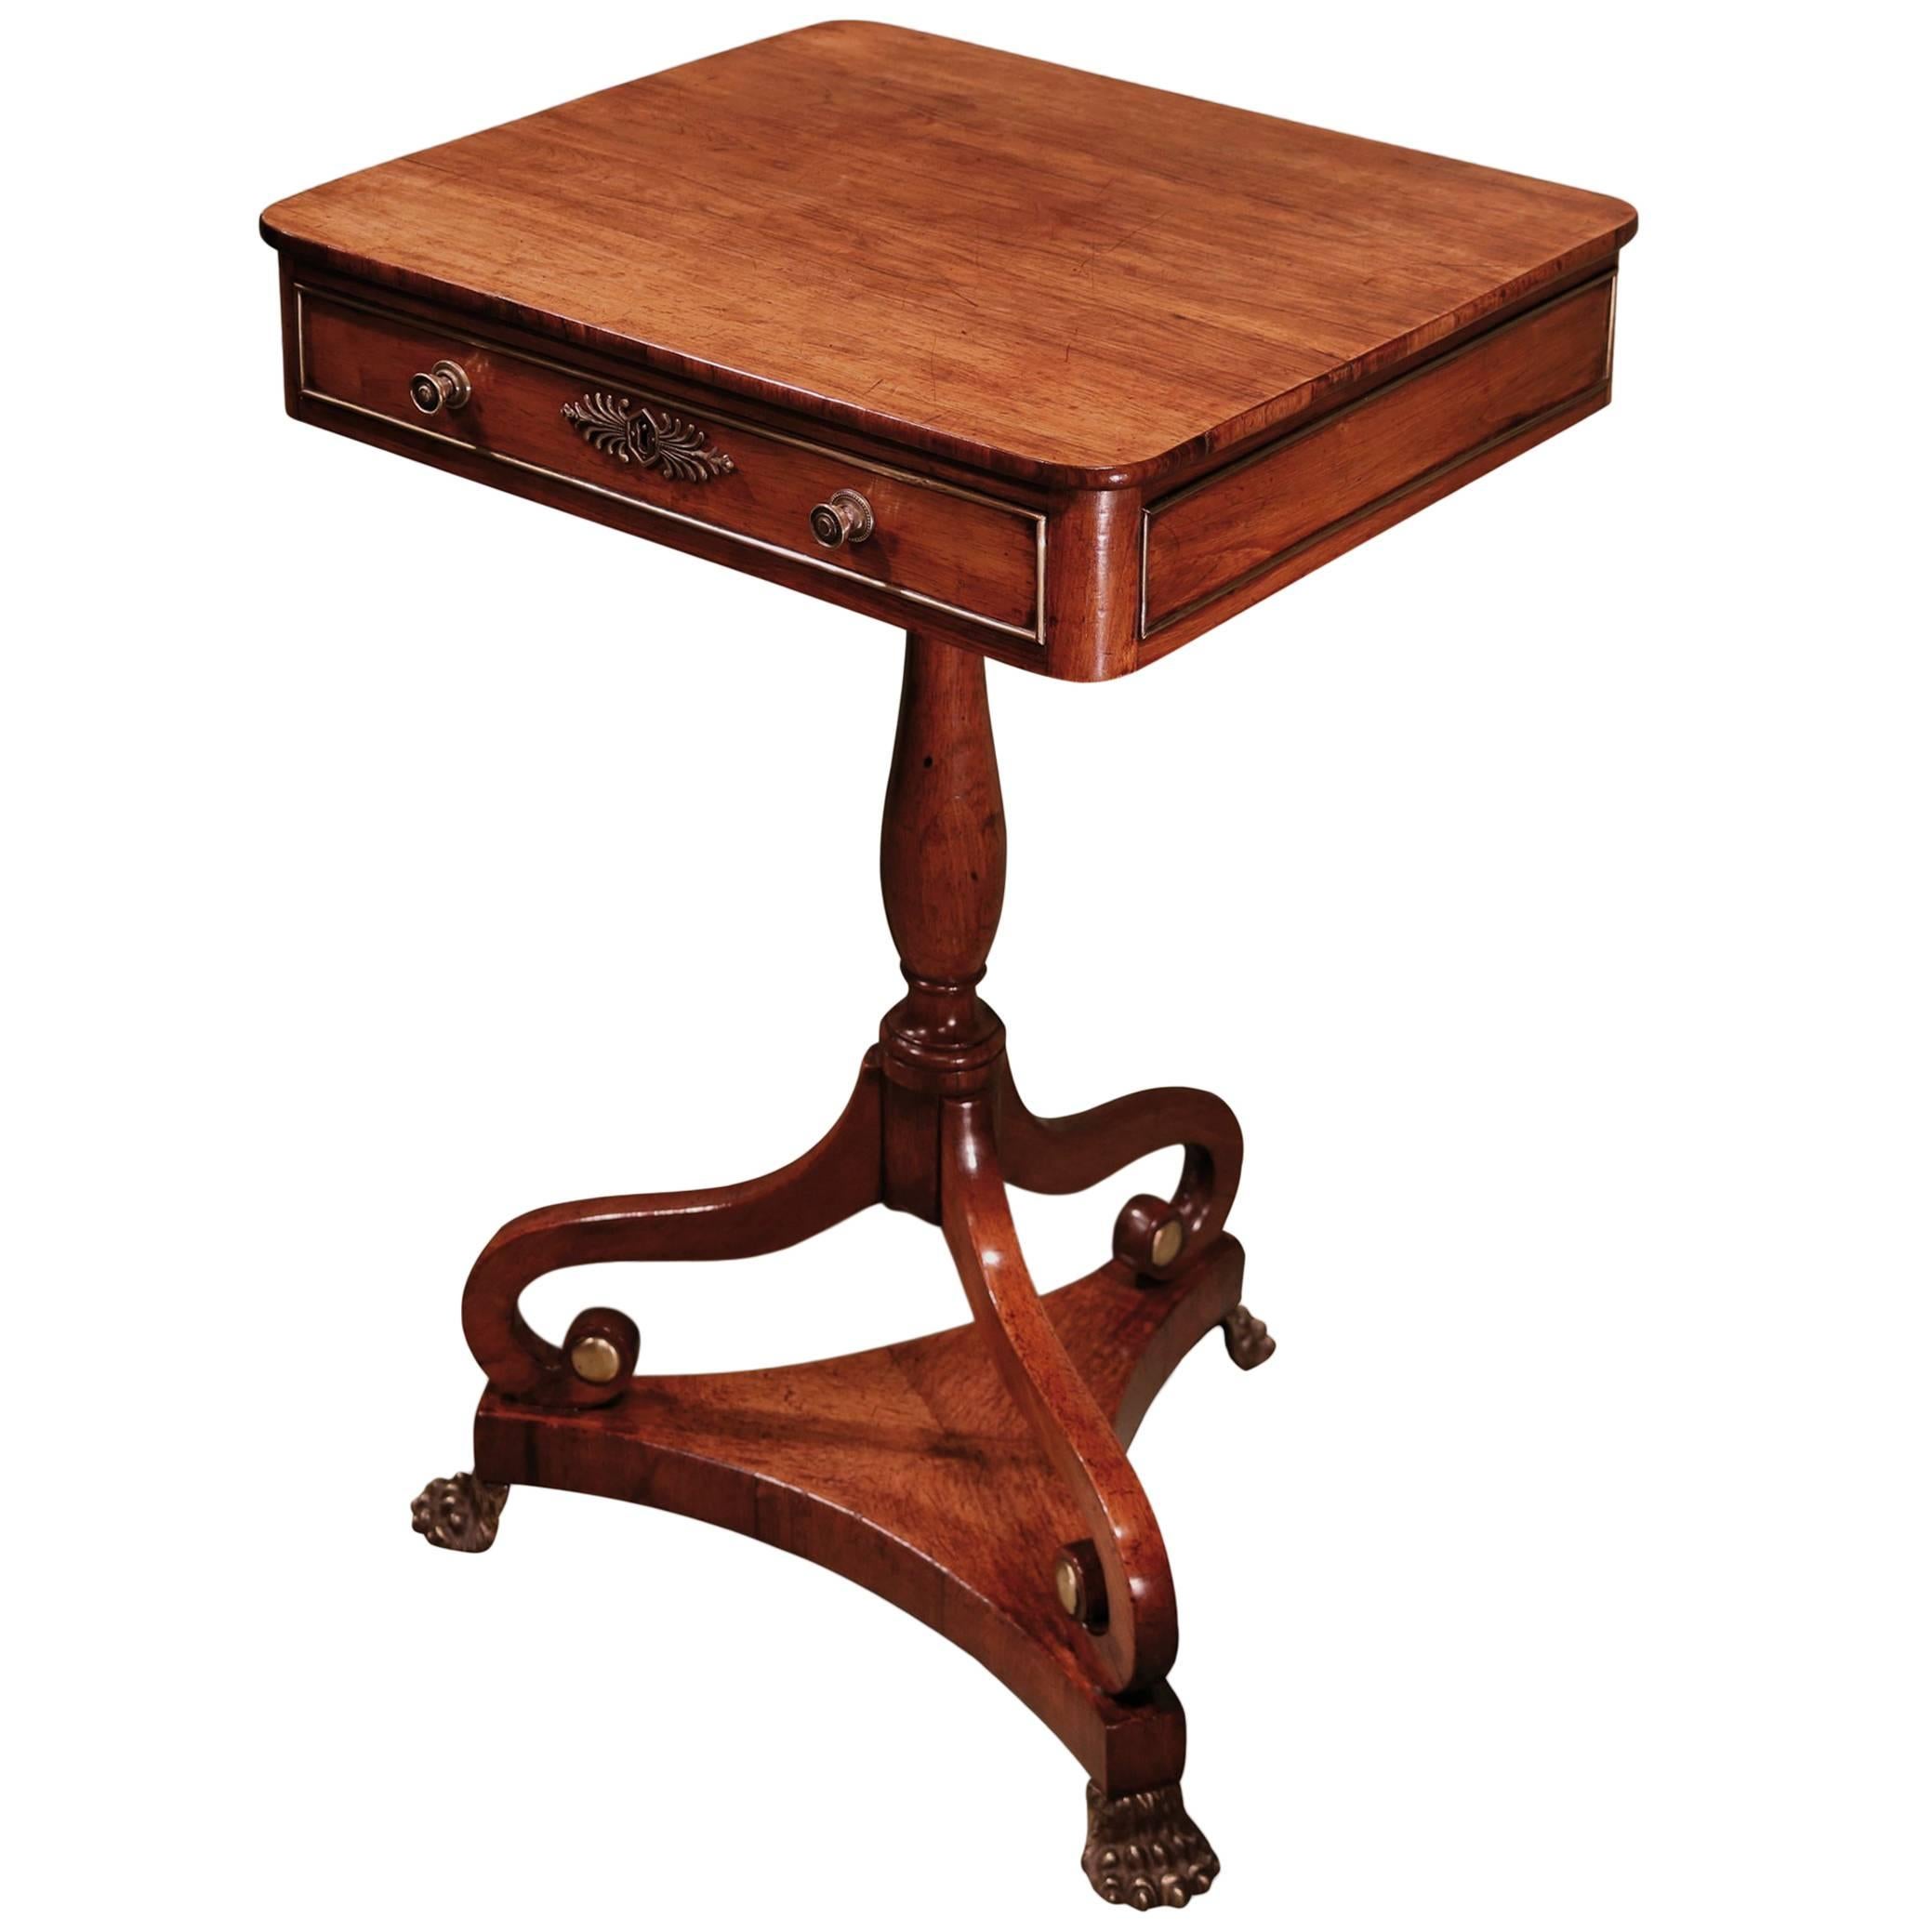 Regency period rosewood occasional table with drawer